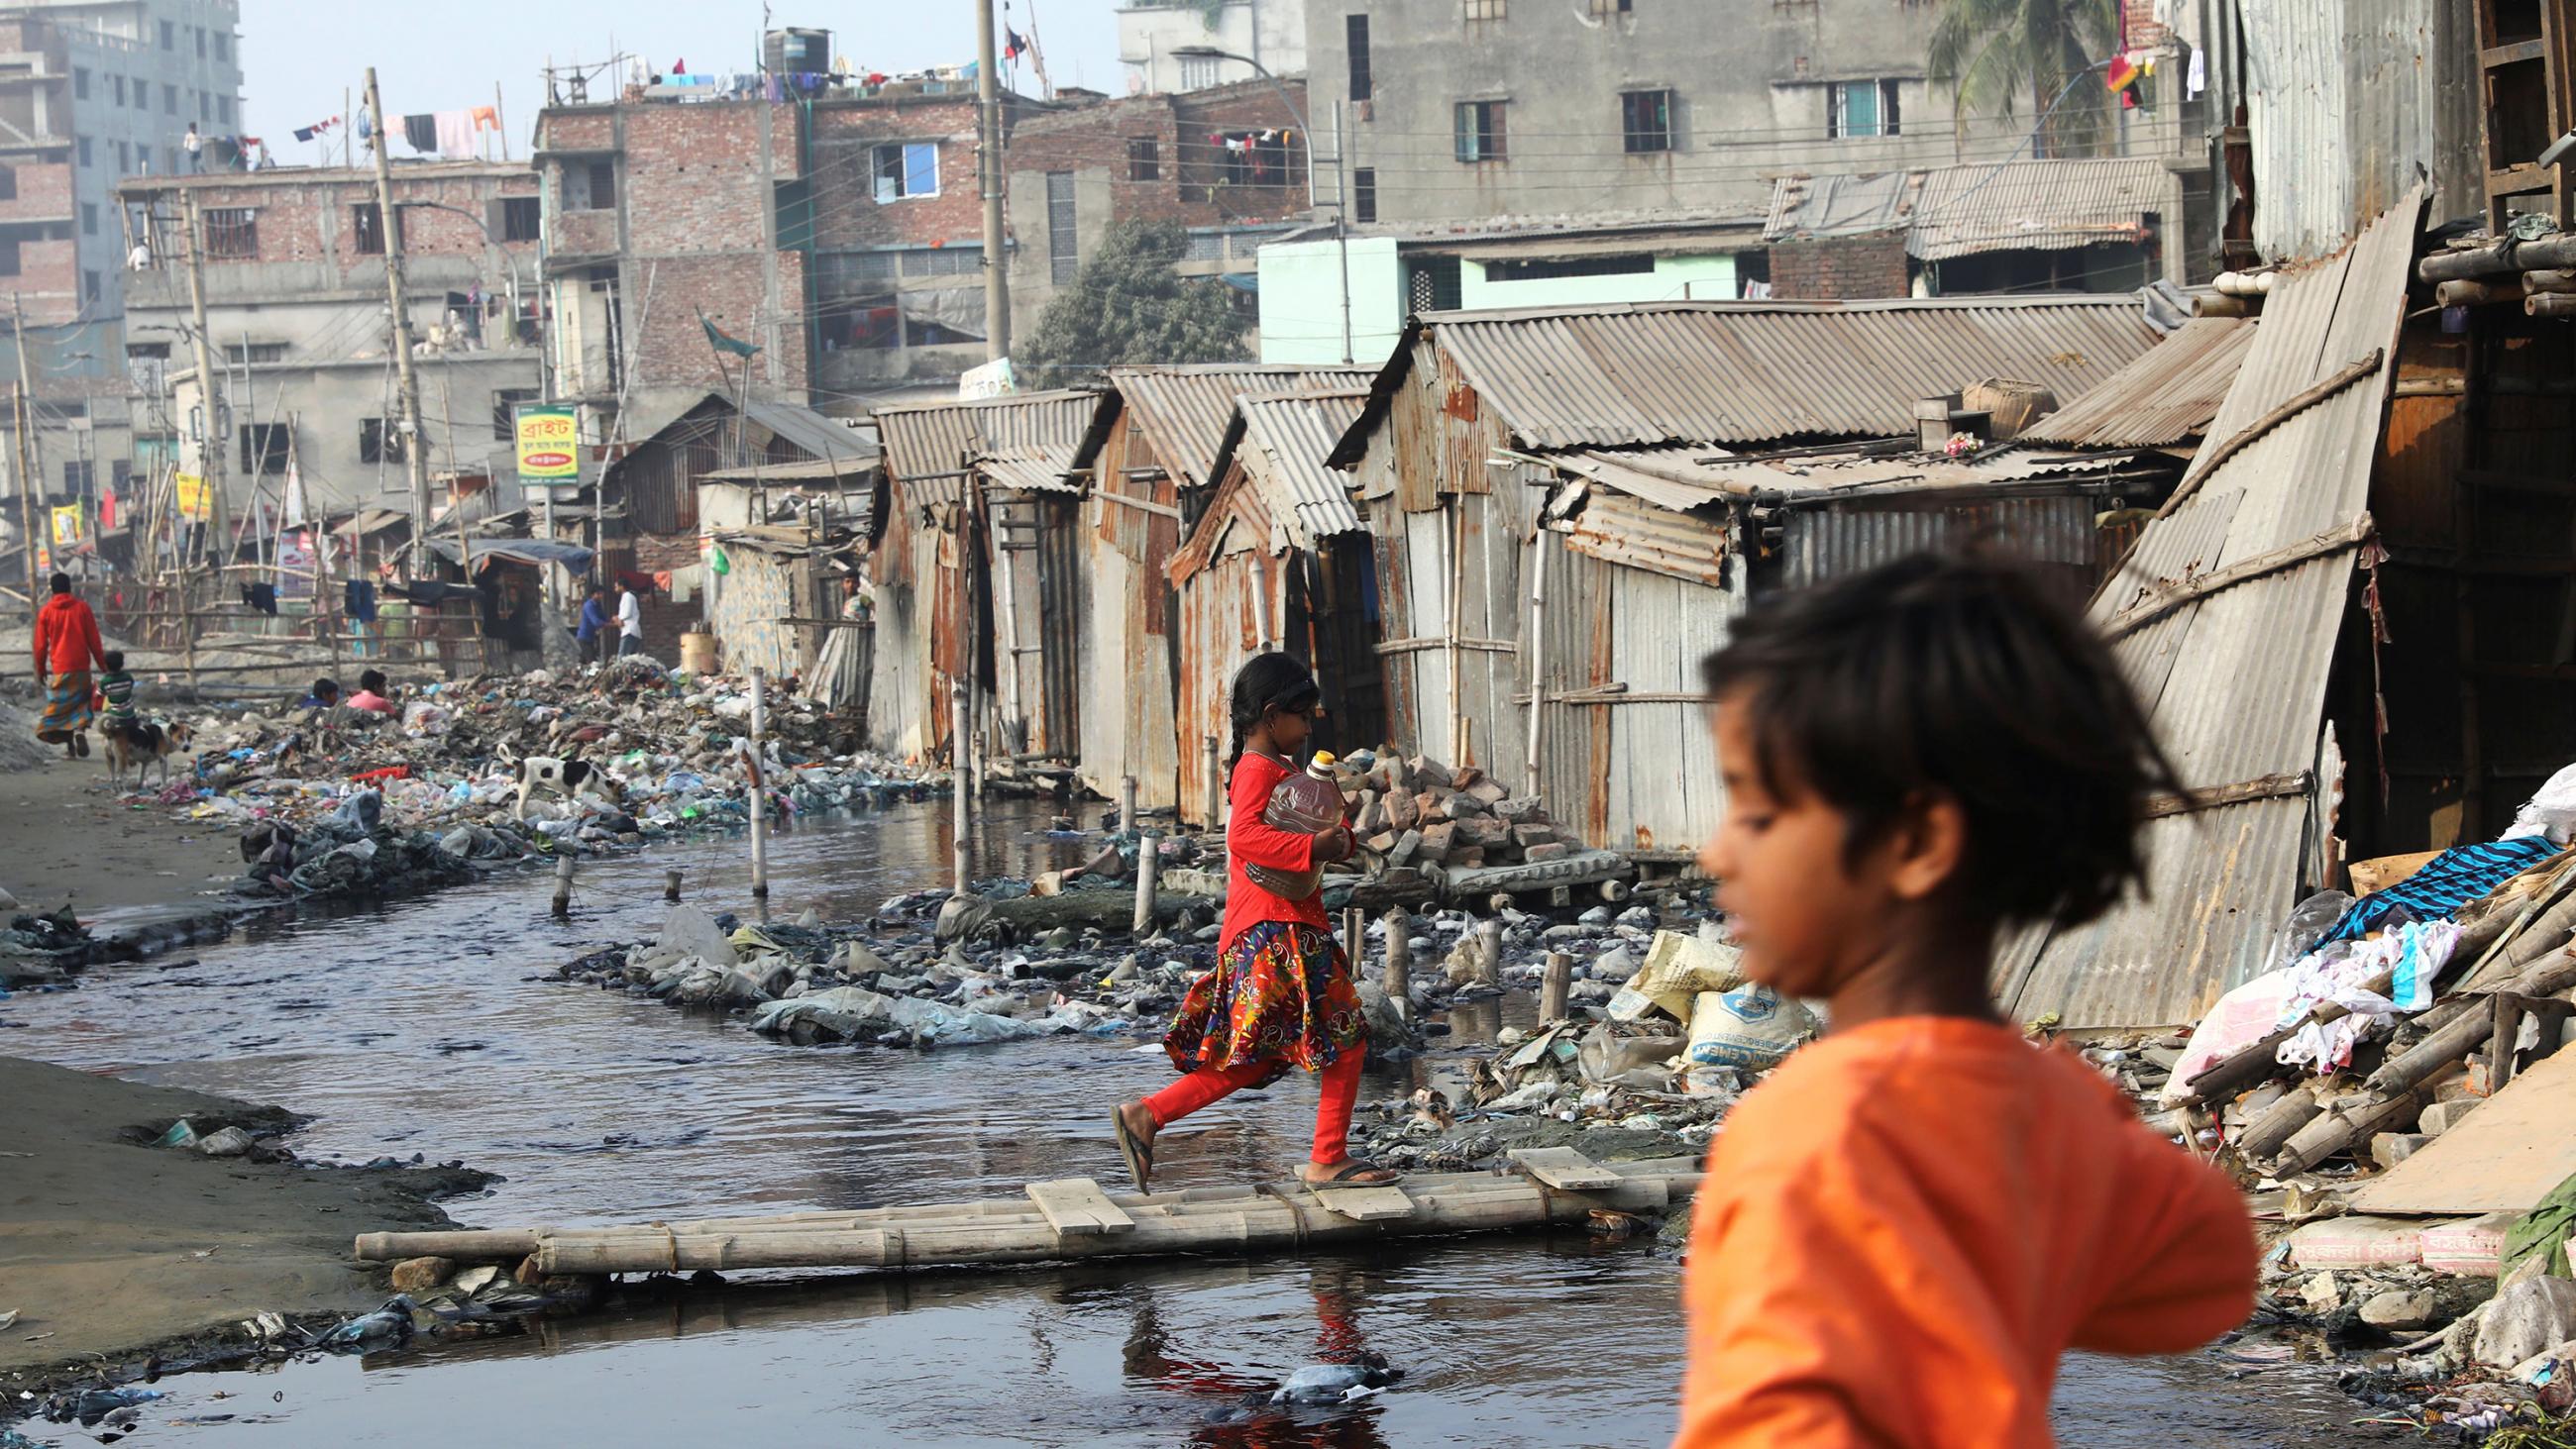 The photo shows a muddy, flooded area in front of tin shacks with a few children walking about. 